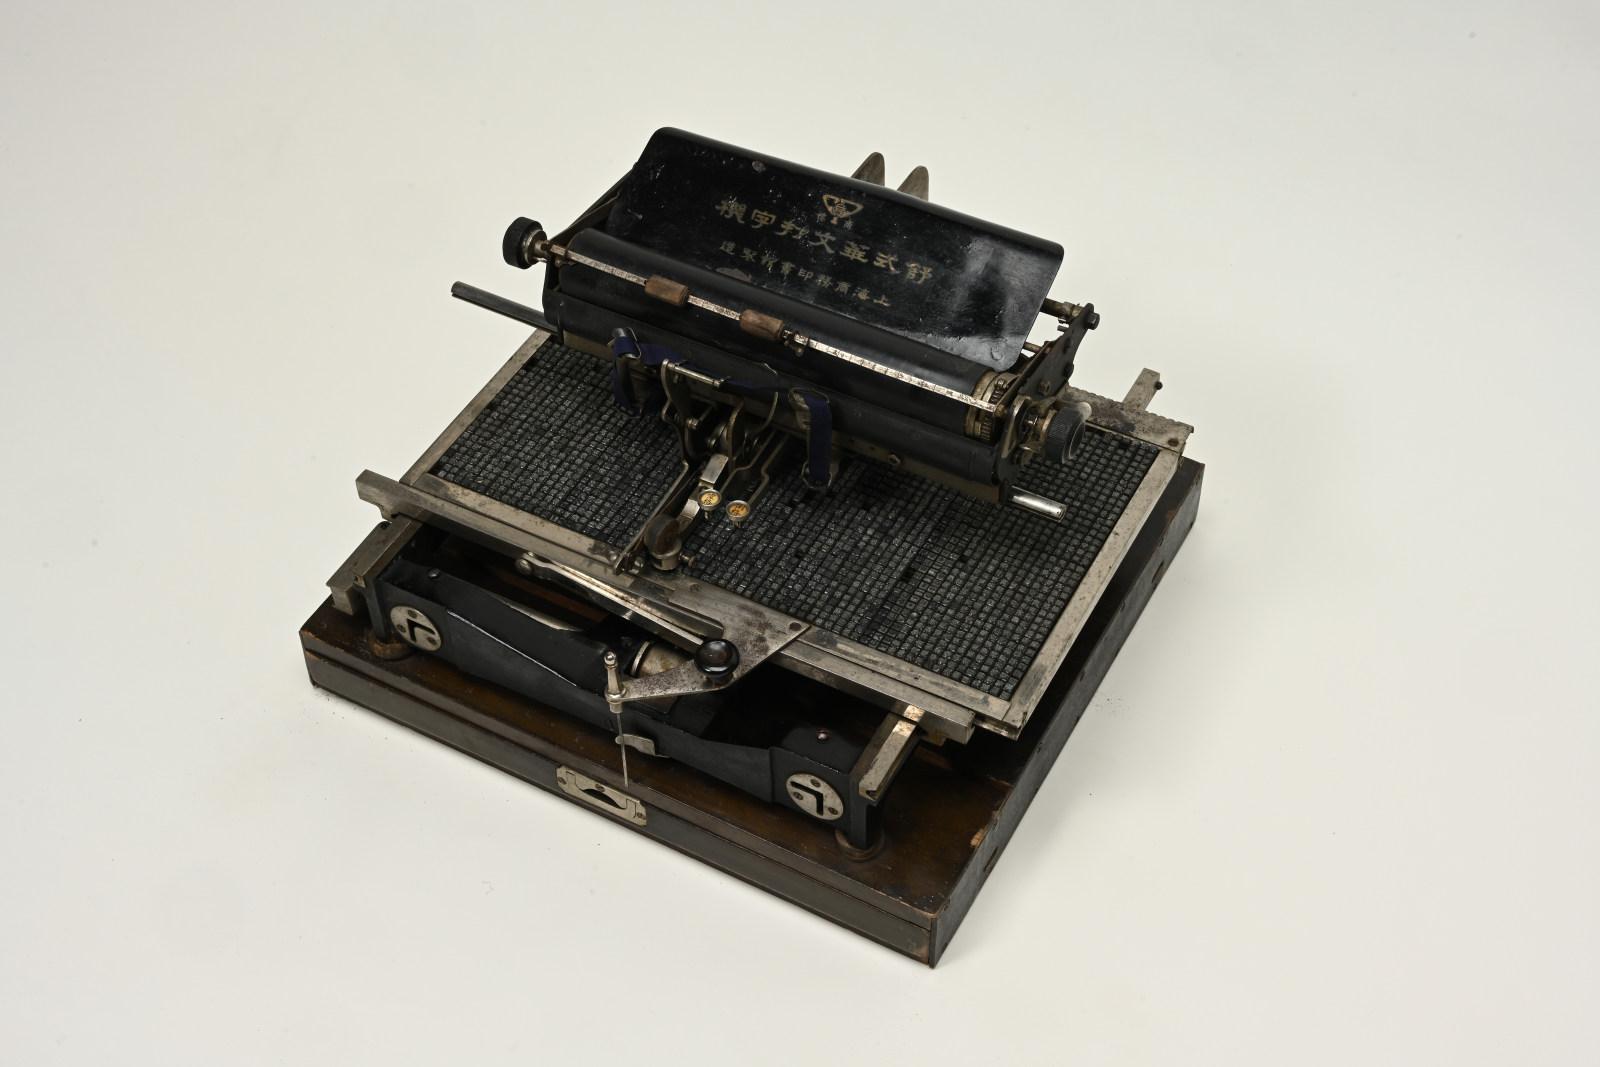 The Dr Sun Yat-sen Museum will launch a new special exhibition, "Learning through play: Old textbooks, toys and games", tomorrow (December 22). Photo shows a Shu-style Chinese typewriter from the early 20th century.
